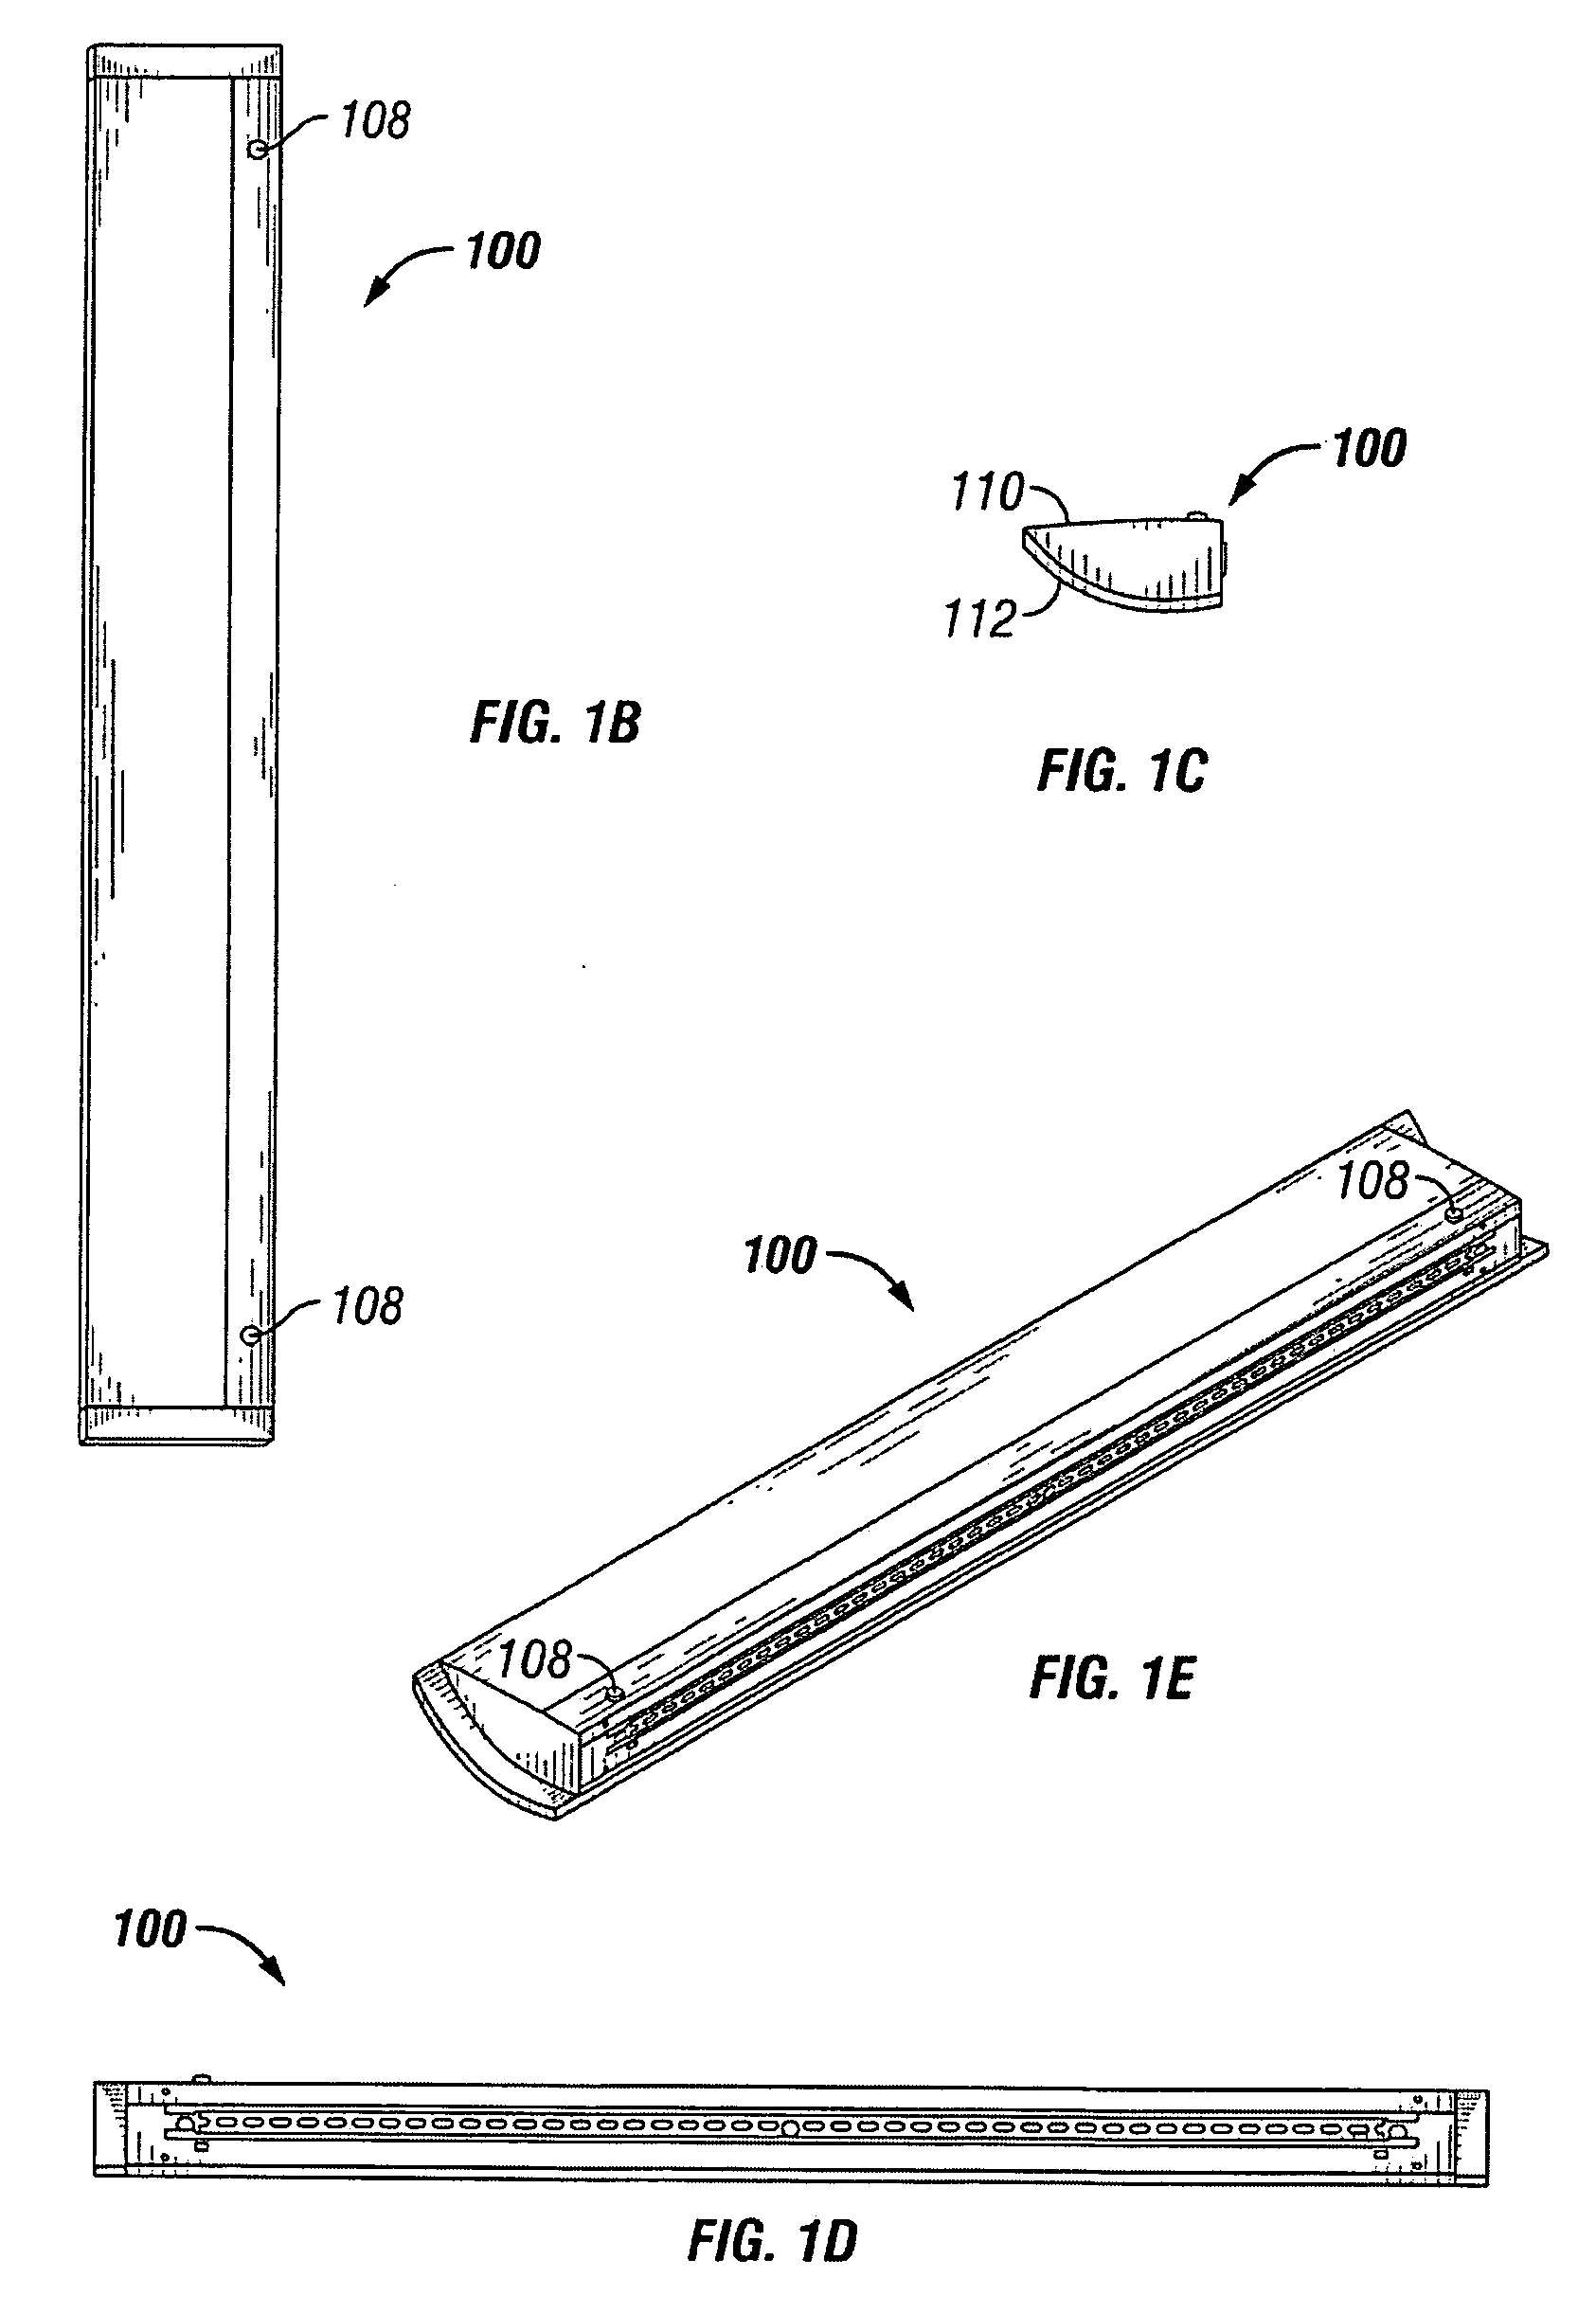 Apparatus and Method for Tool Free Wall Mount Installation of a Luminaire